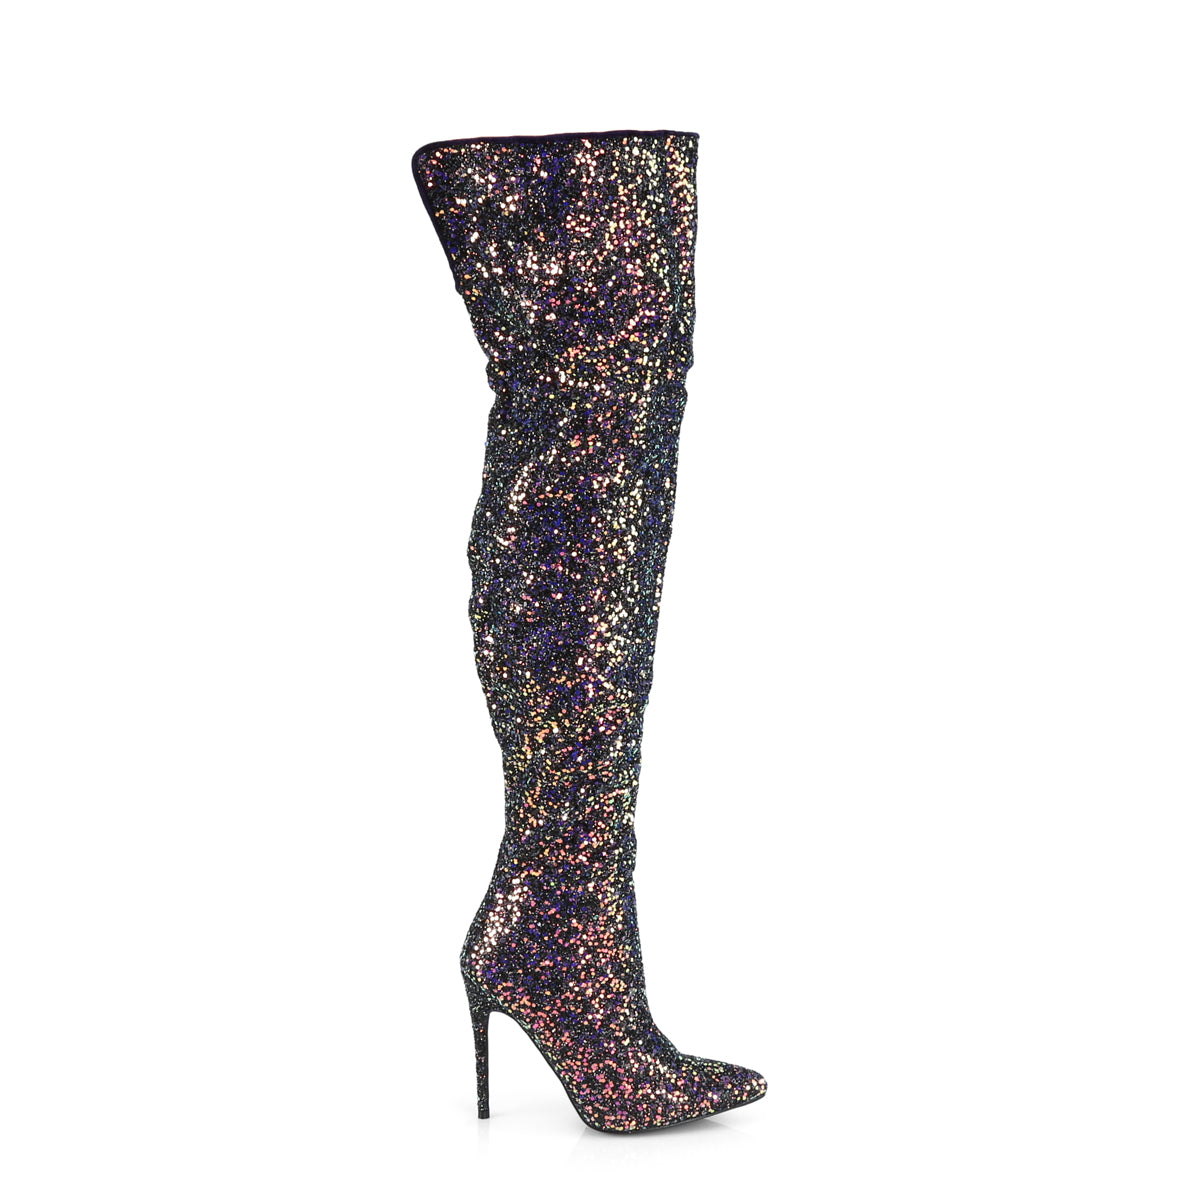 Pleaser Womens Boots. COURTLY-3015 BLK Multi Glitter